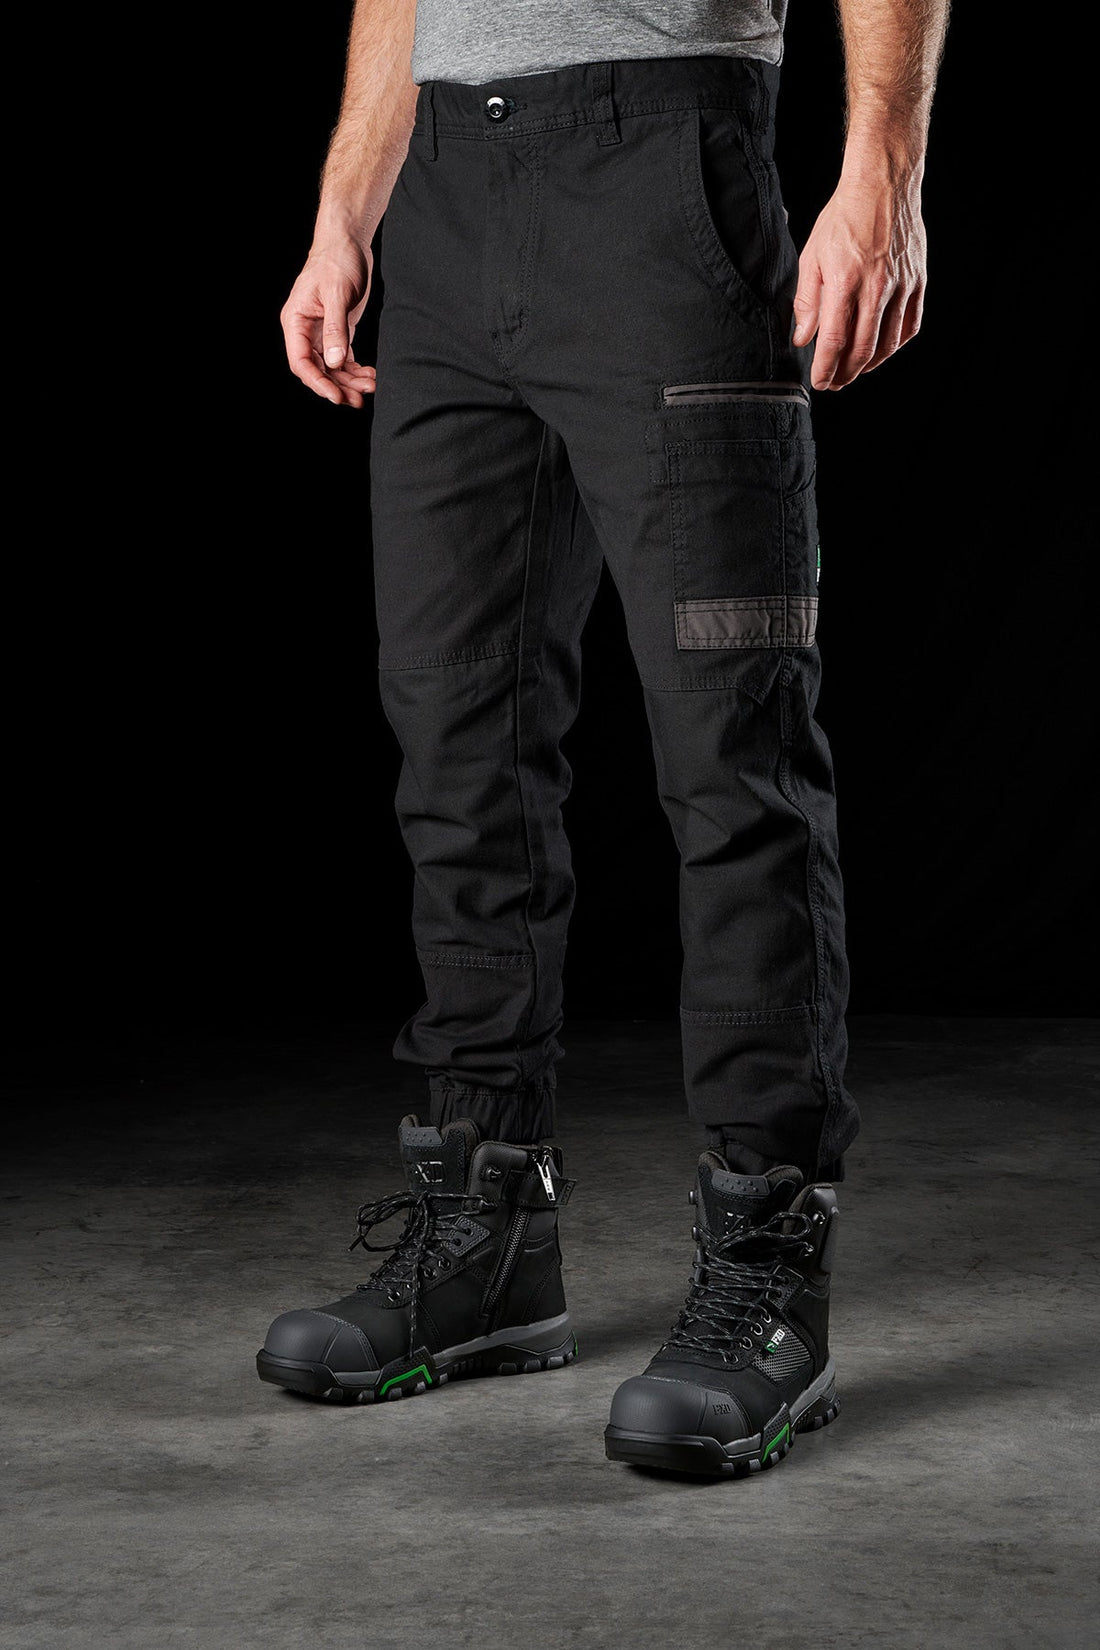 FXD WP-4 Cuffed Work Trousers - BIG Boots UK